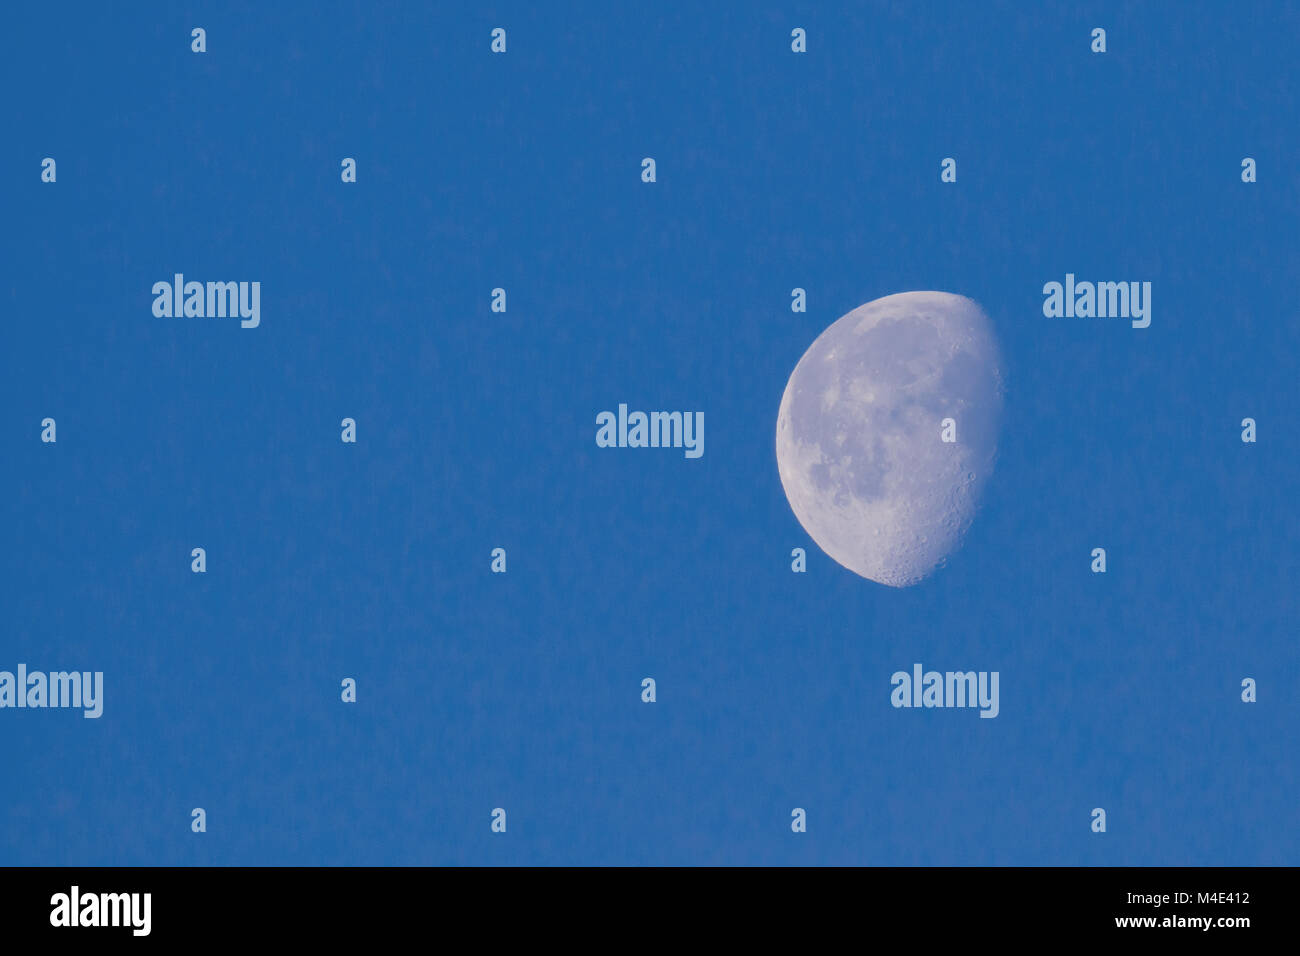 Waxing Gibbous Moon in blue sky showing craters Stock Photo